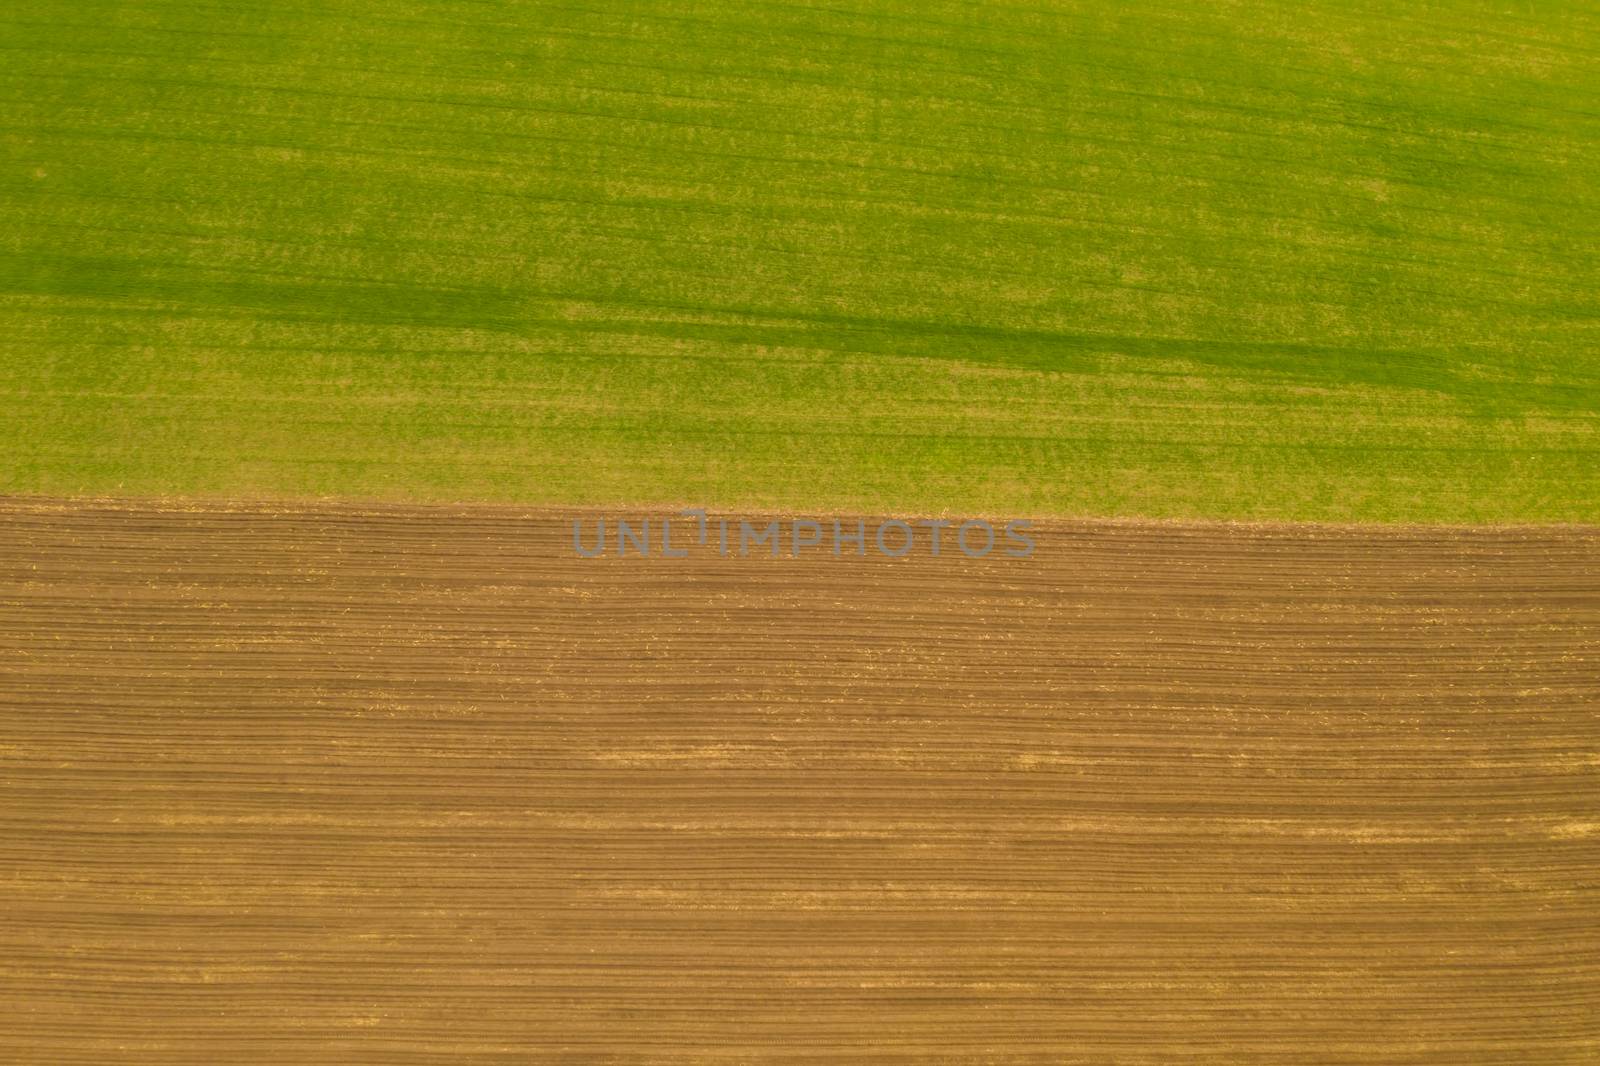 Fields texture from above during springtime, half green half ground